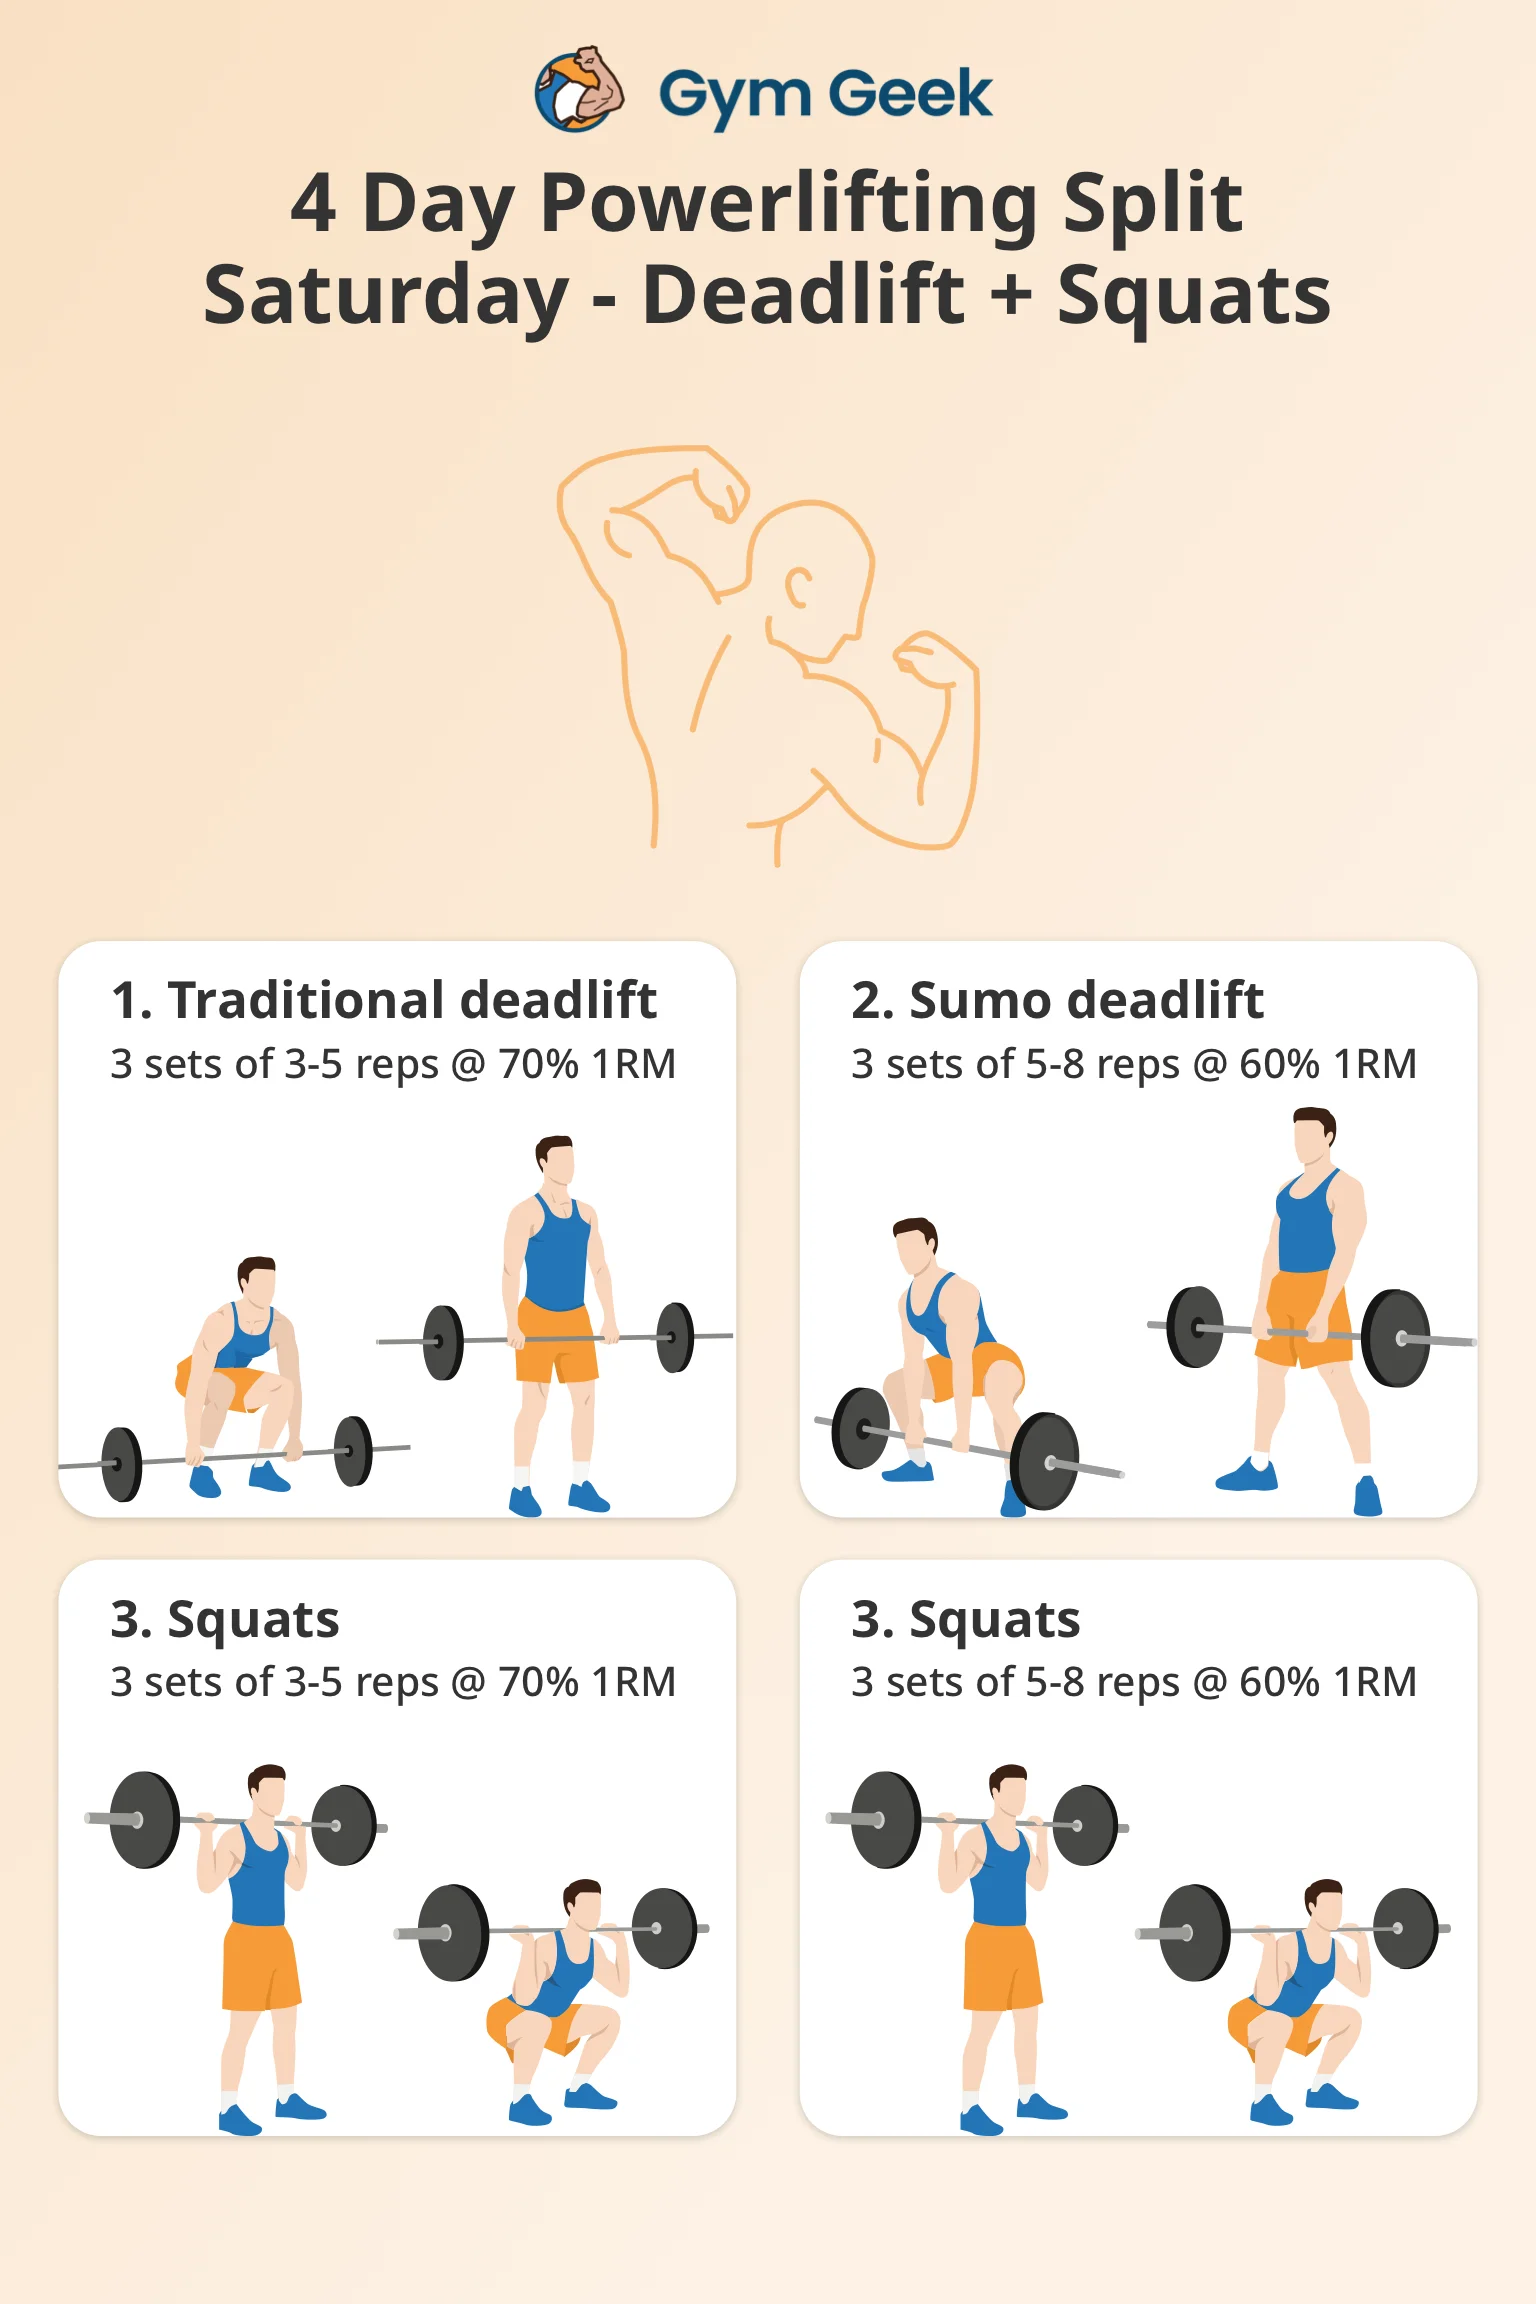 infographic - 4 day powerlifting program - Saturday (Deadlifts and squats day)